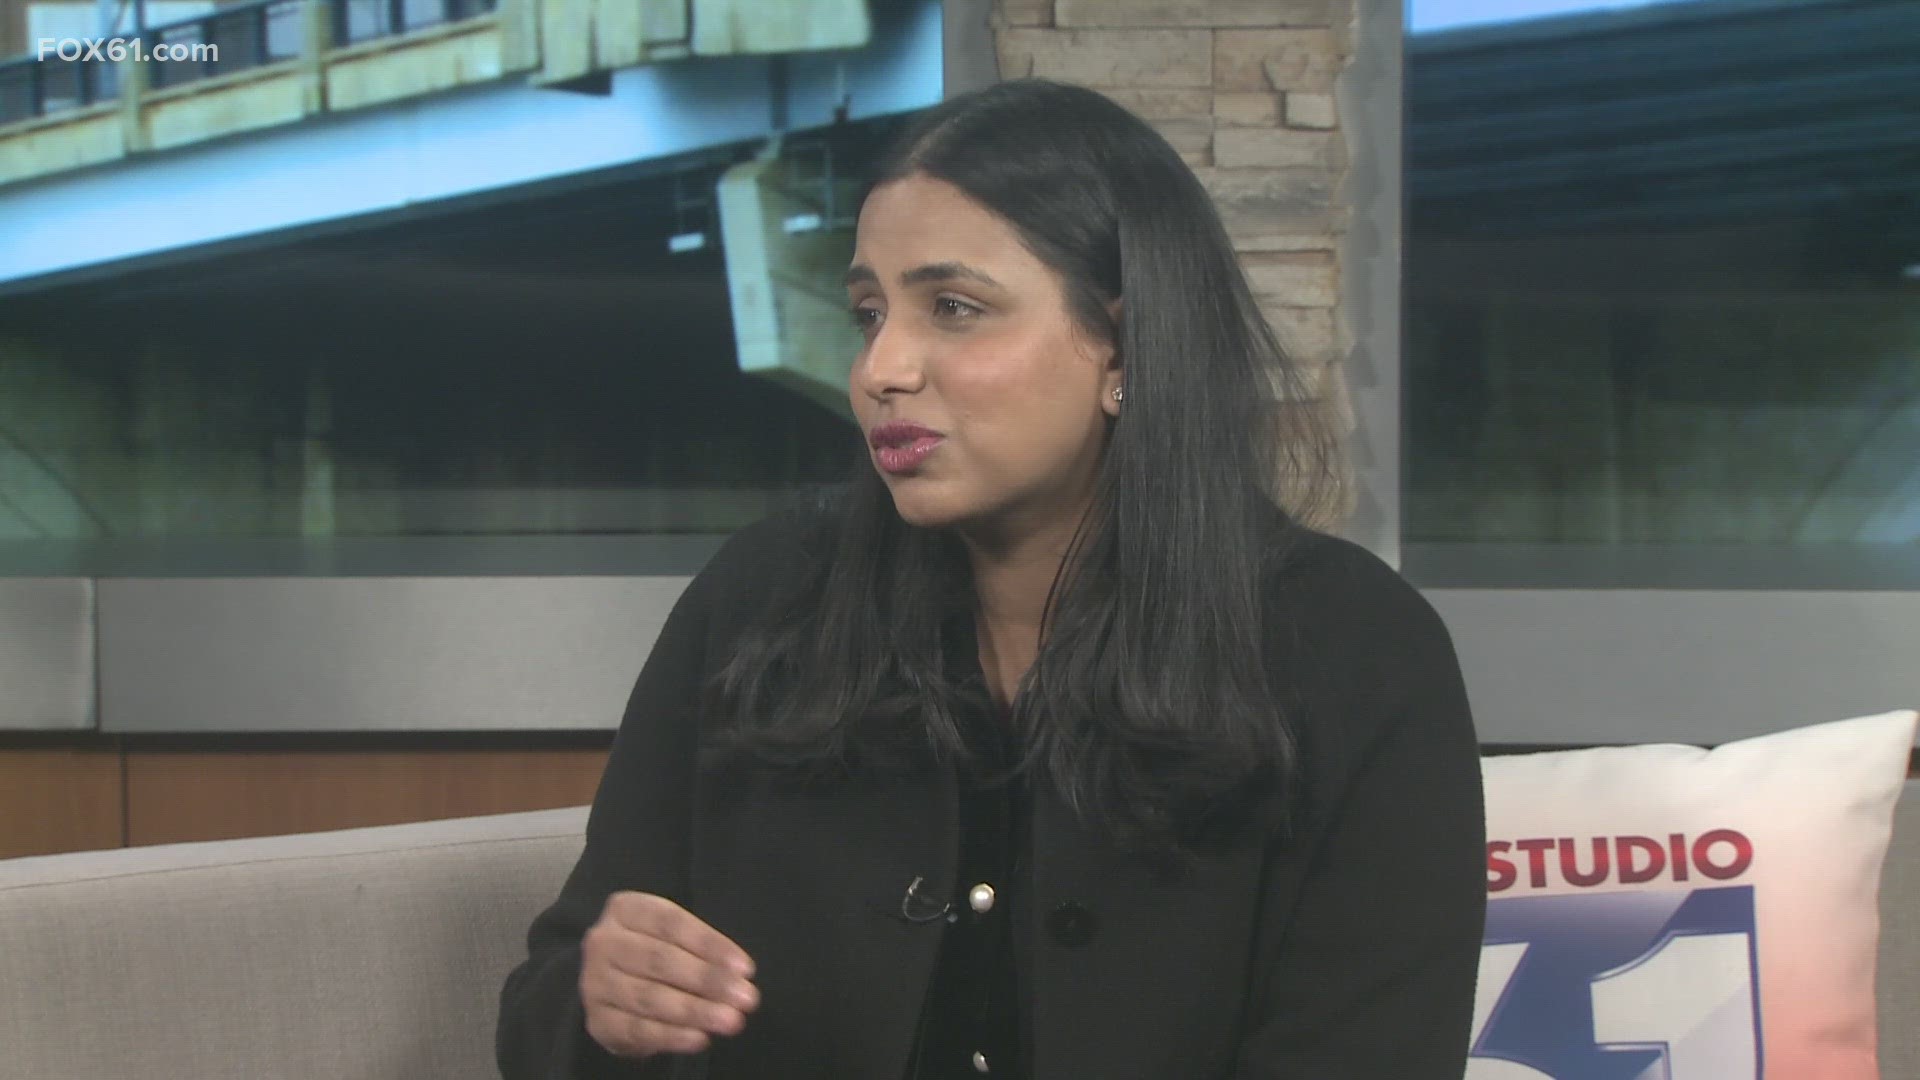 March is Colorectal Cancer Awareness Month. An advanced gastroenterologist joined FOX61 on Monday to discuss the significance of getting screened for colon cancer.